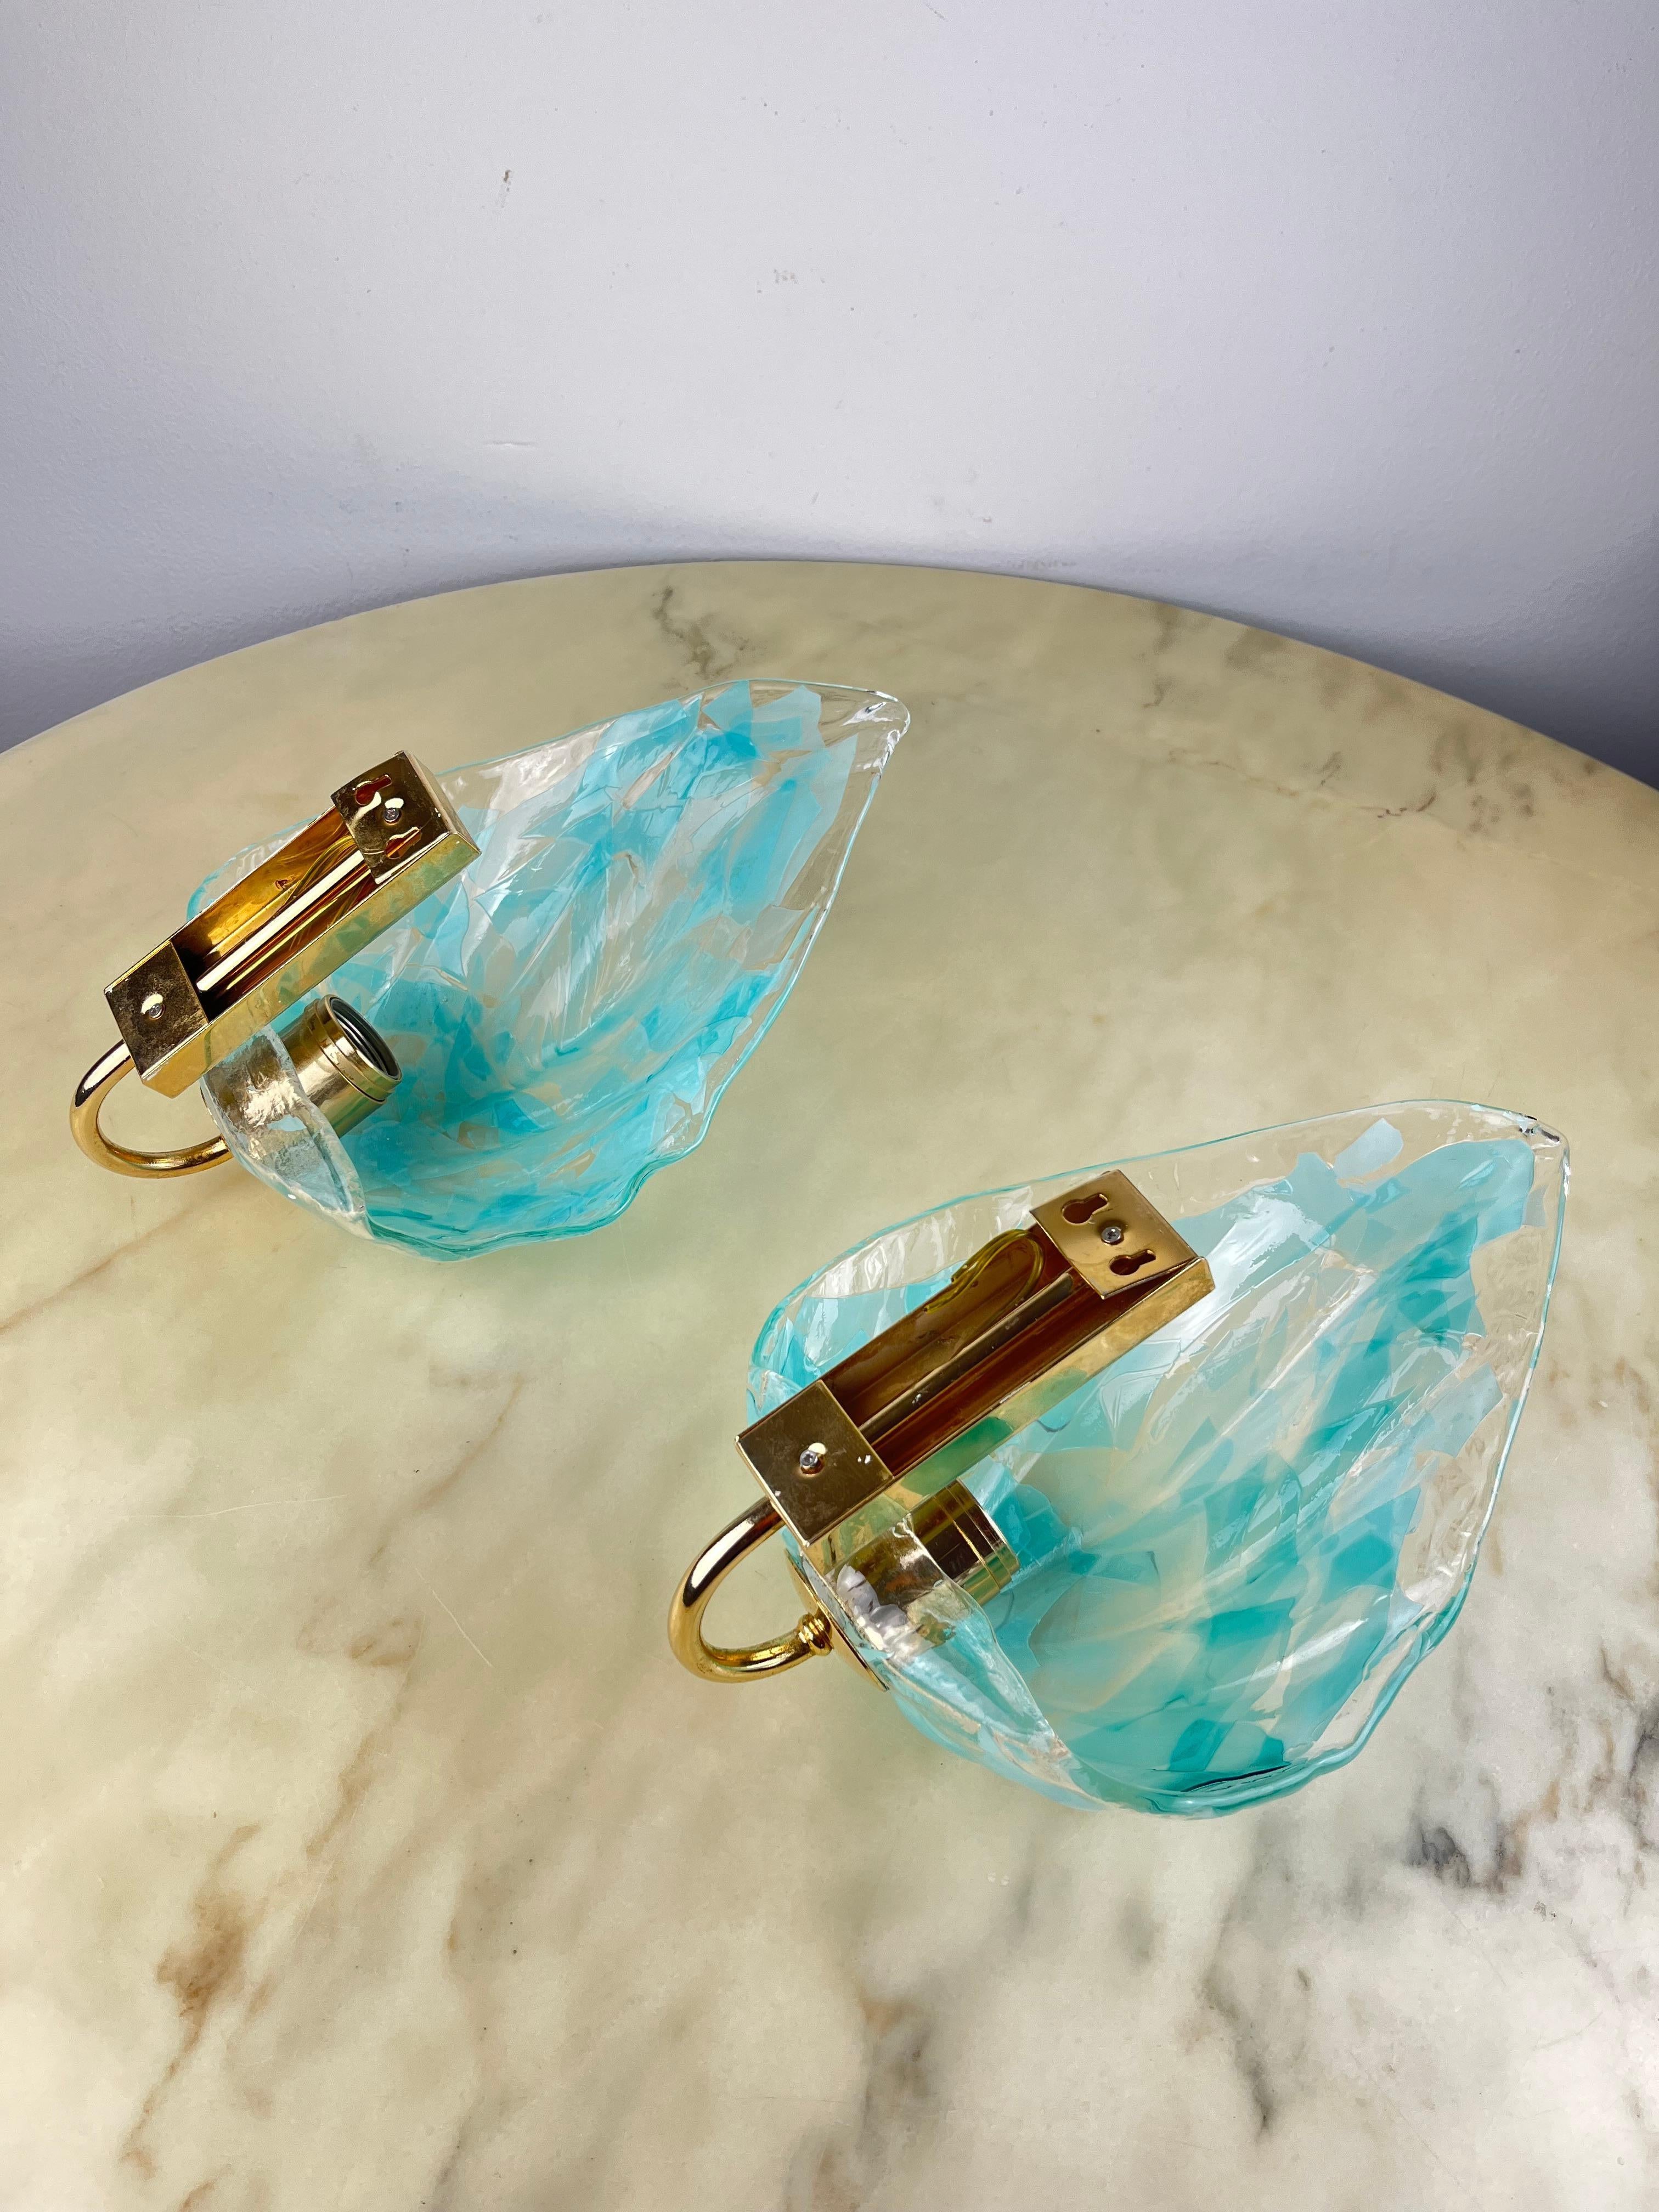 Pair of Murano Glass Wall Lamps, La Murrina, Italy, 1980s For Sale 1